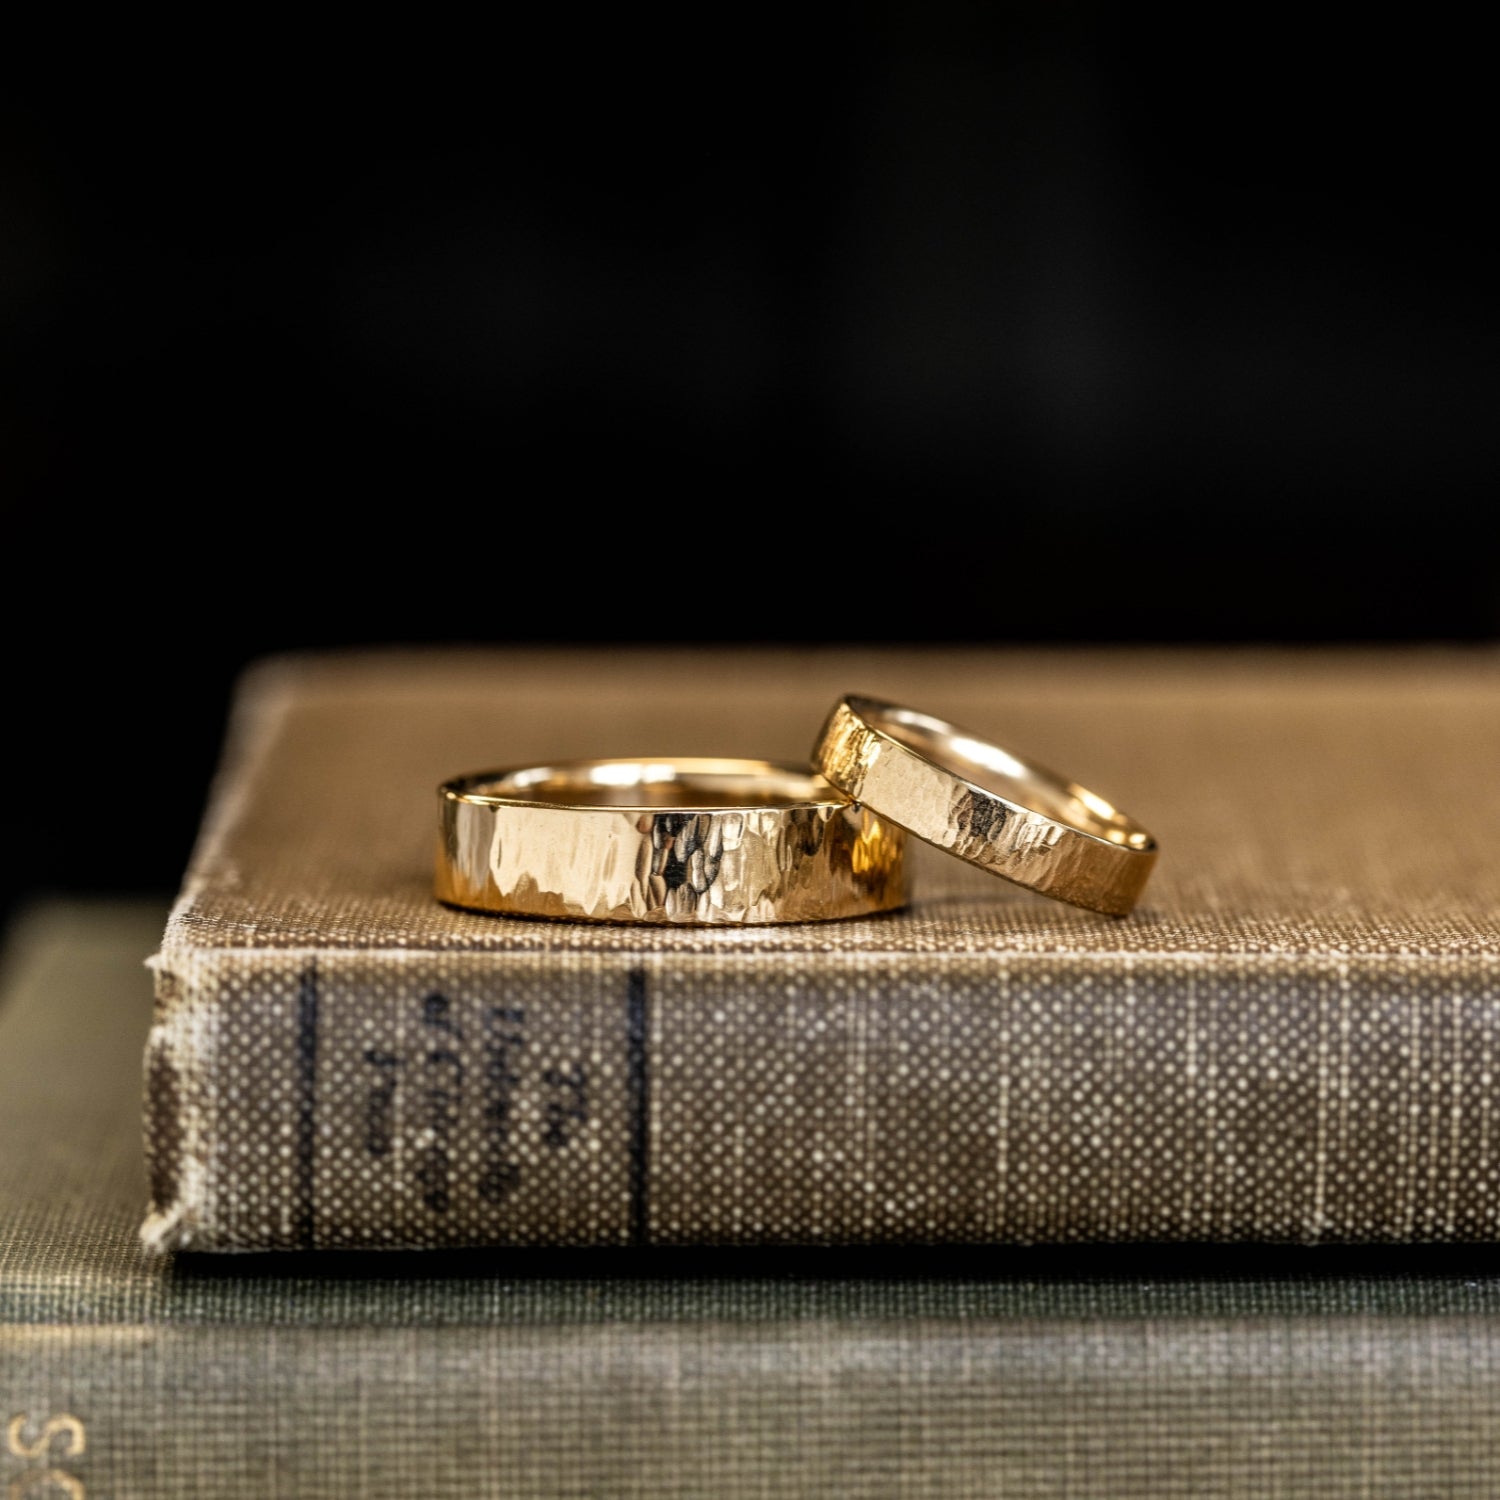 His and Her Wedding Rings Set. Gold Wedding Rings Set. Couple Wedding Bands  With Unique Design. Matching Gold Bands. Unusual Bands Set - Etsy